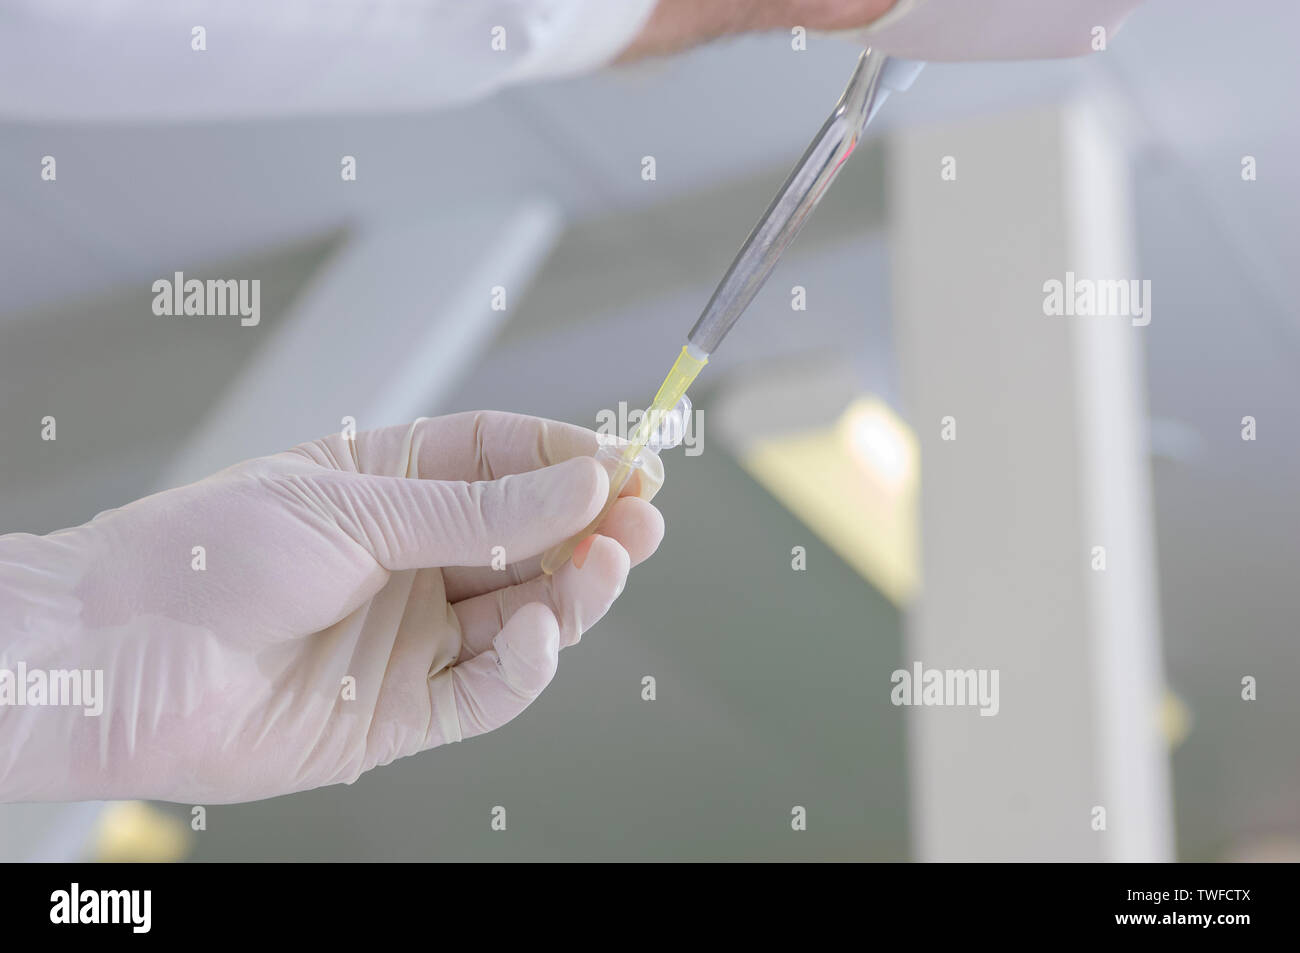 View of gloved hands in a science laboratory pipetting a sample. Stock Photo